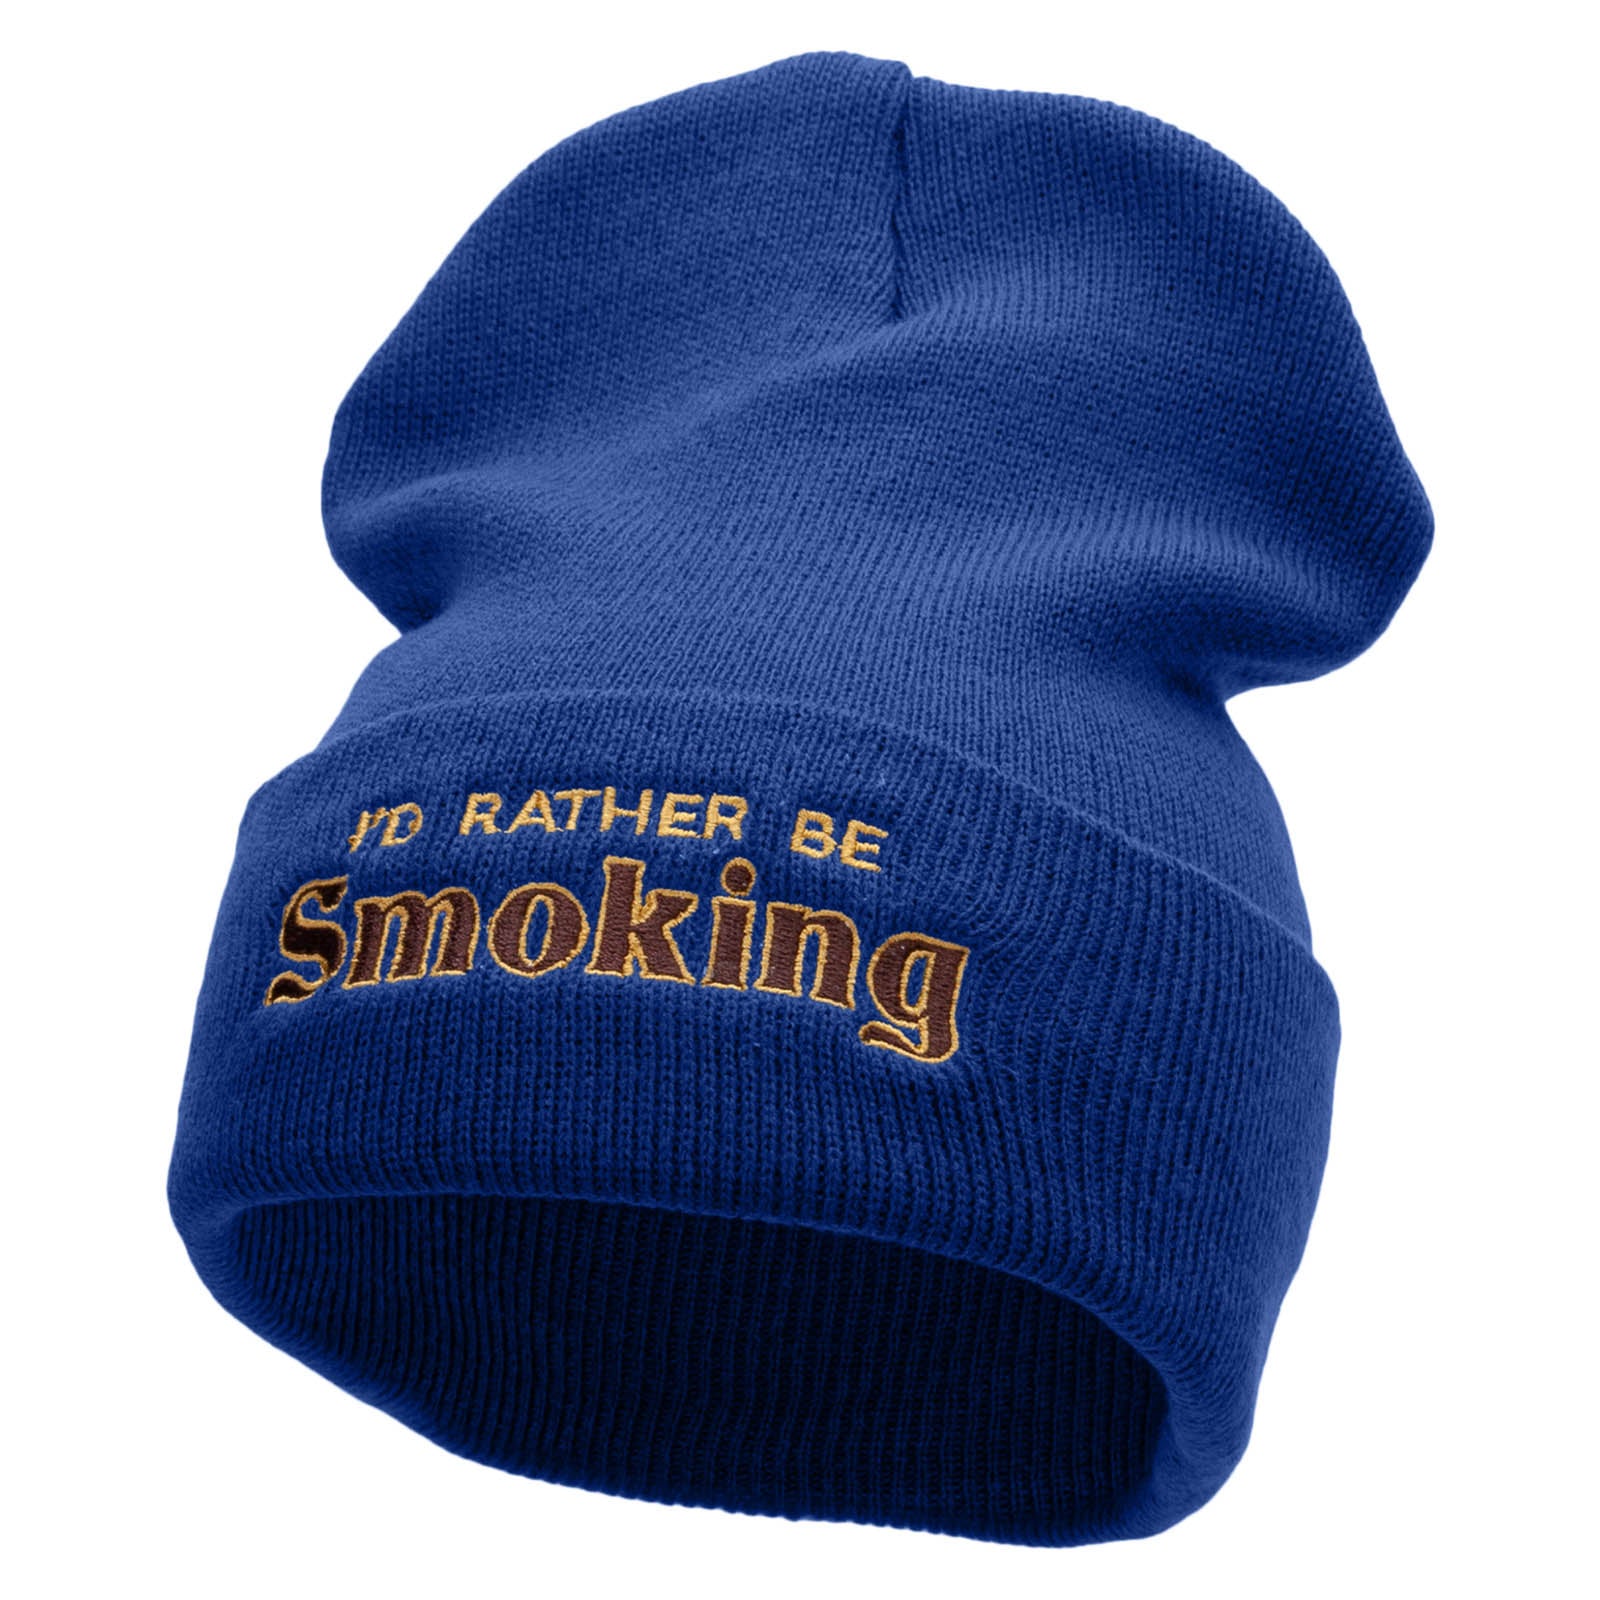 I&#039;d Rather Be Smoking Phrase Embroidered 12 Inch Solid Long Beanie Made in USA - Royal OSFM